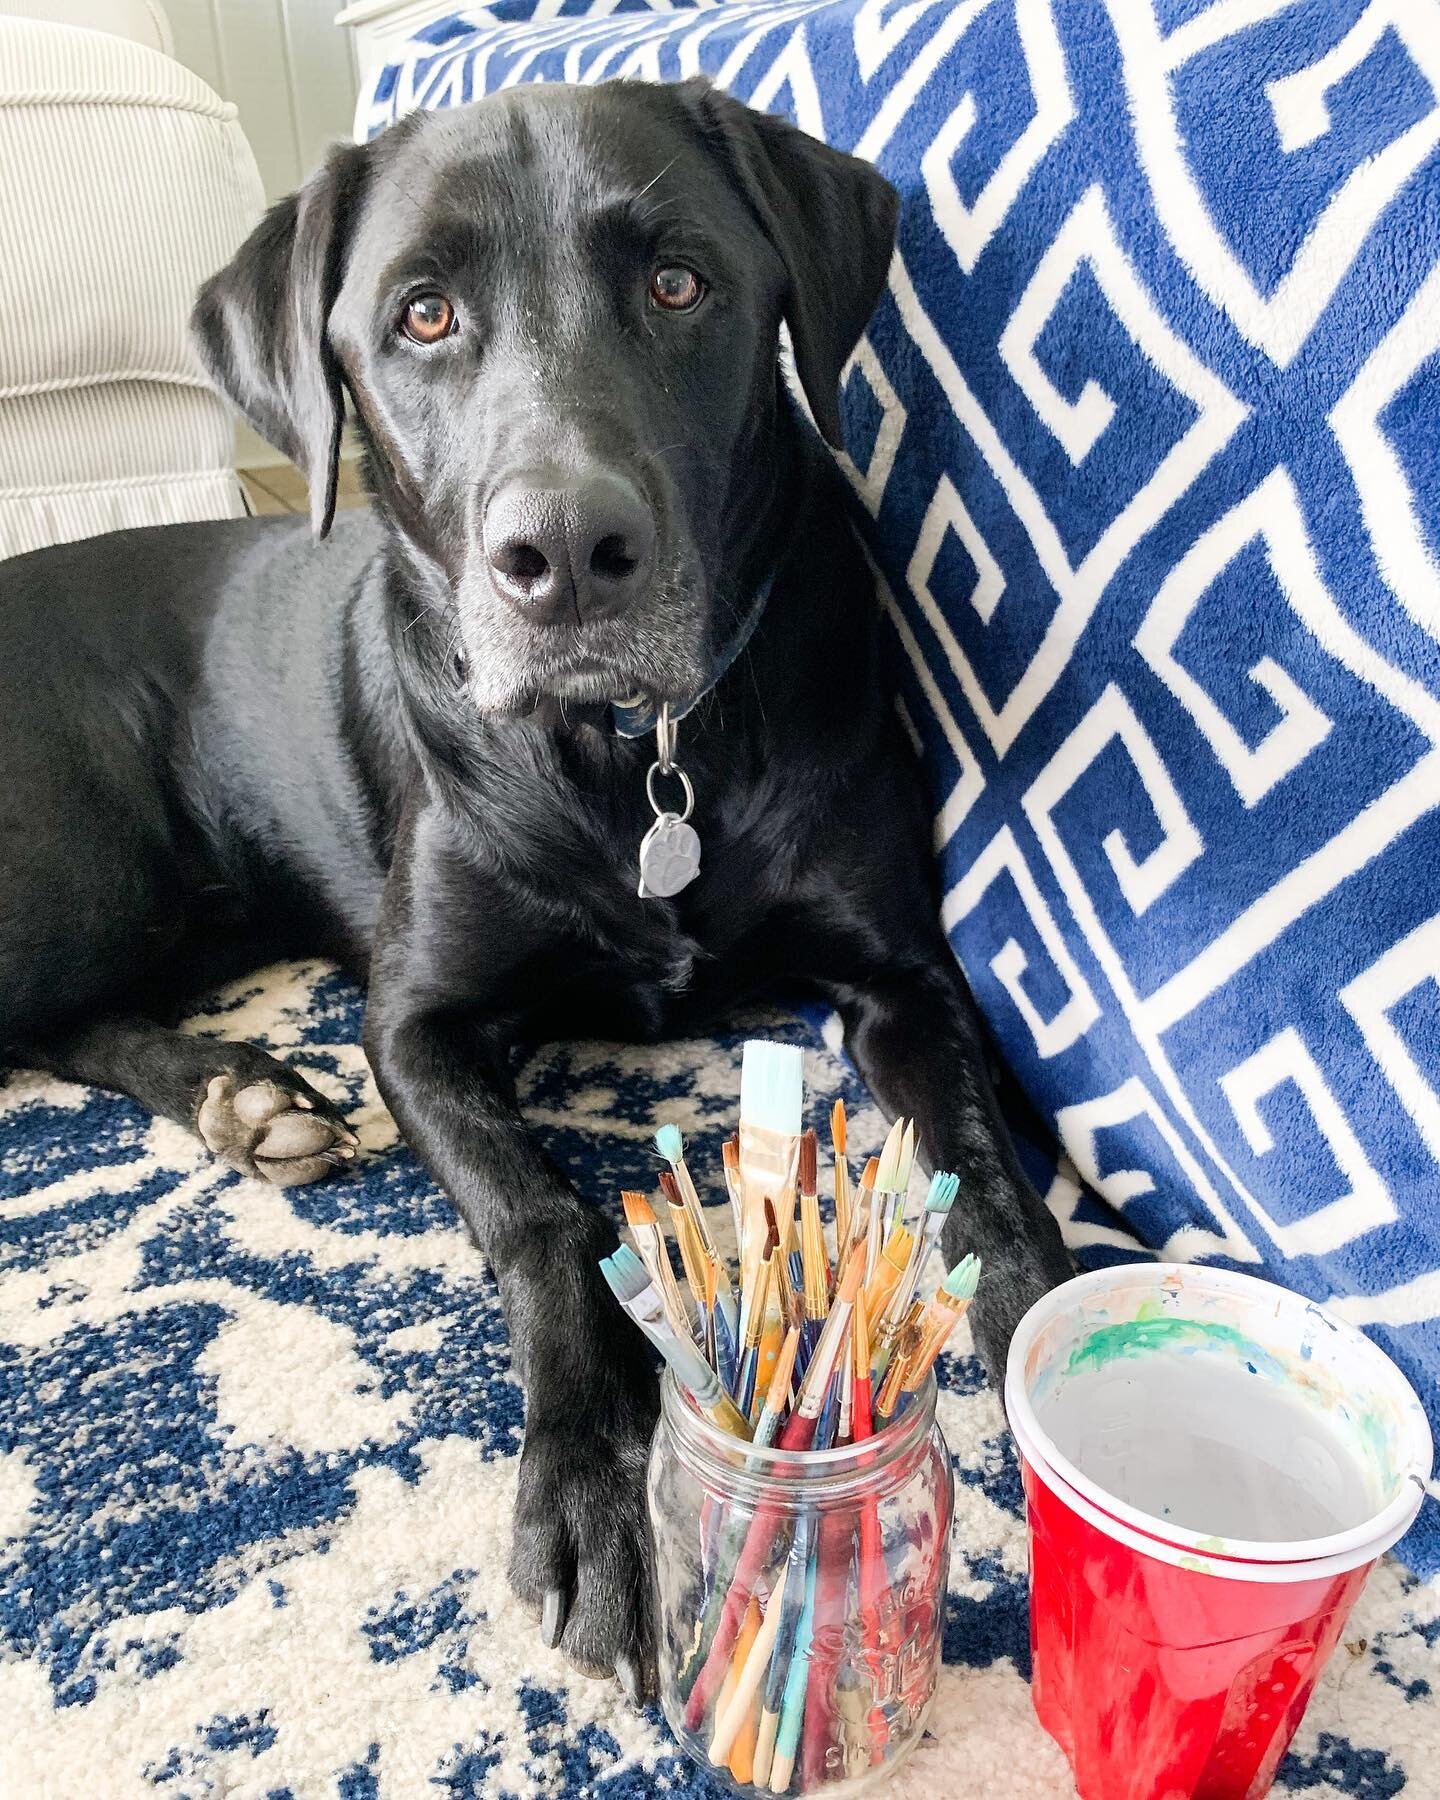 My favorite art buddy 🐾 he just snuggled up next to me as I wrote this 😭😍 and sometimes tries to sit on my arm while I&rsquo;m painting etc. he tried to literally sit on me the other night 🙈

In other news, I don&rsquo;t know about you but I&rsqu